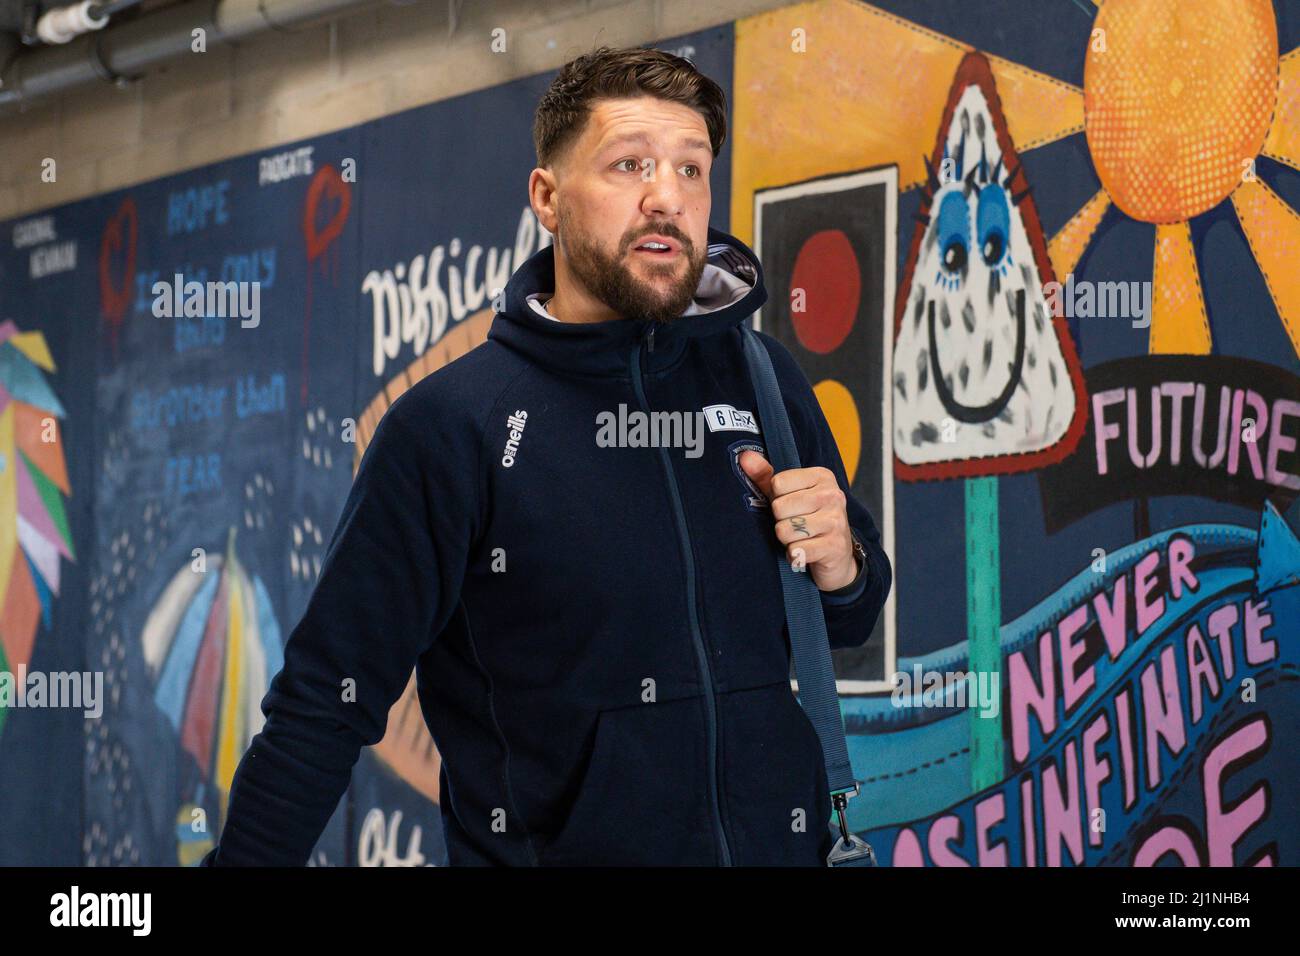 Gareth Widdop #6 of Warrington Wolves arrives at The Halliwell Jones Stadium in ,  on 3/27/2022. (Photo by Craig Thomas/News Images/Sipa USA) Stock Photo